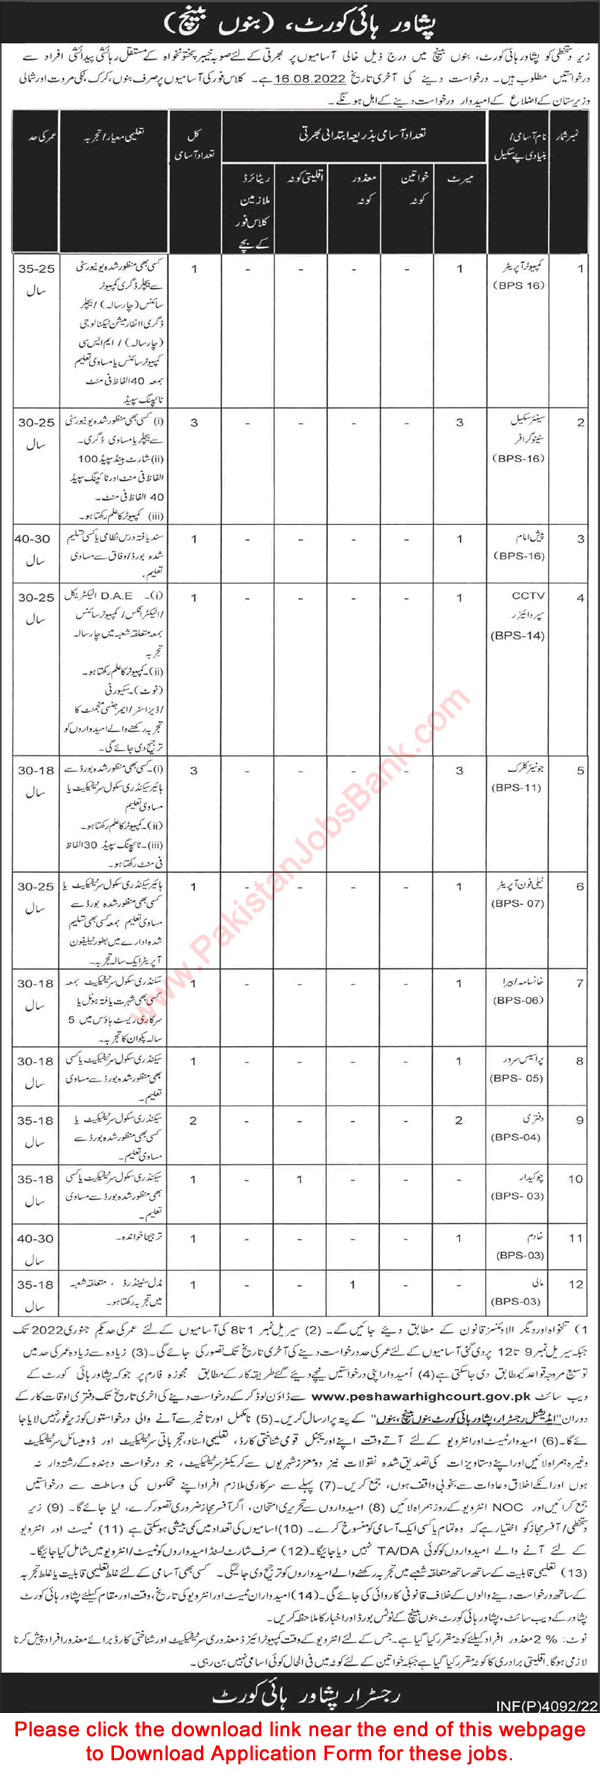 Peshawar High Court Jobs 2022 July Application Form Bannu Bench Stenographers, Clerks & Others Latest